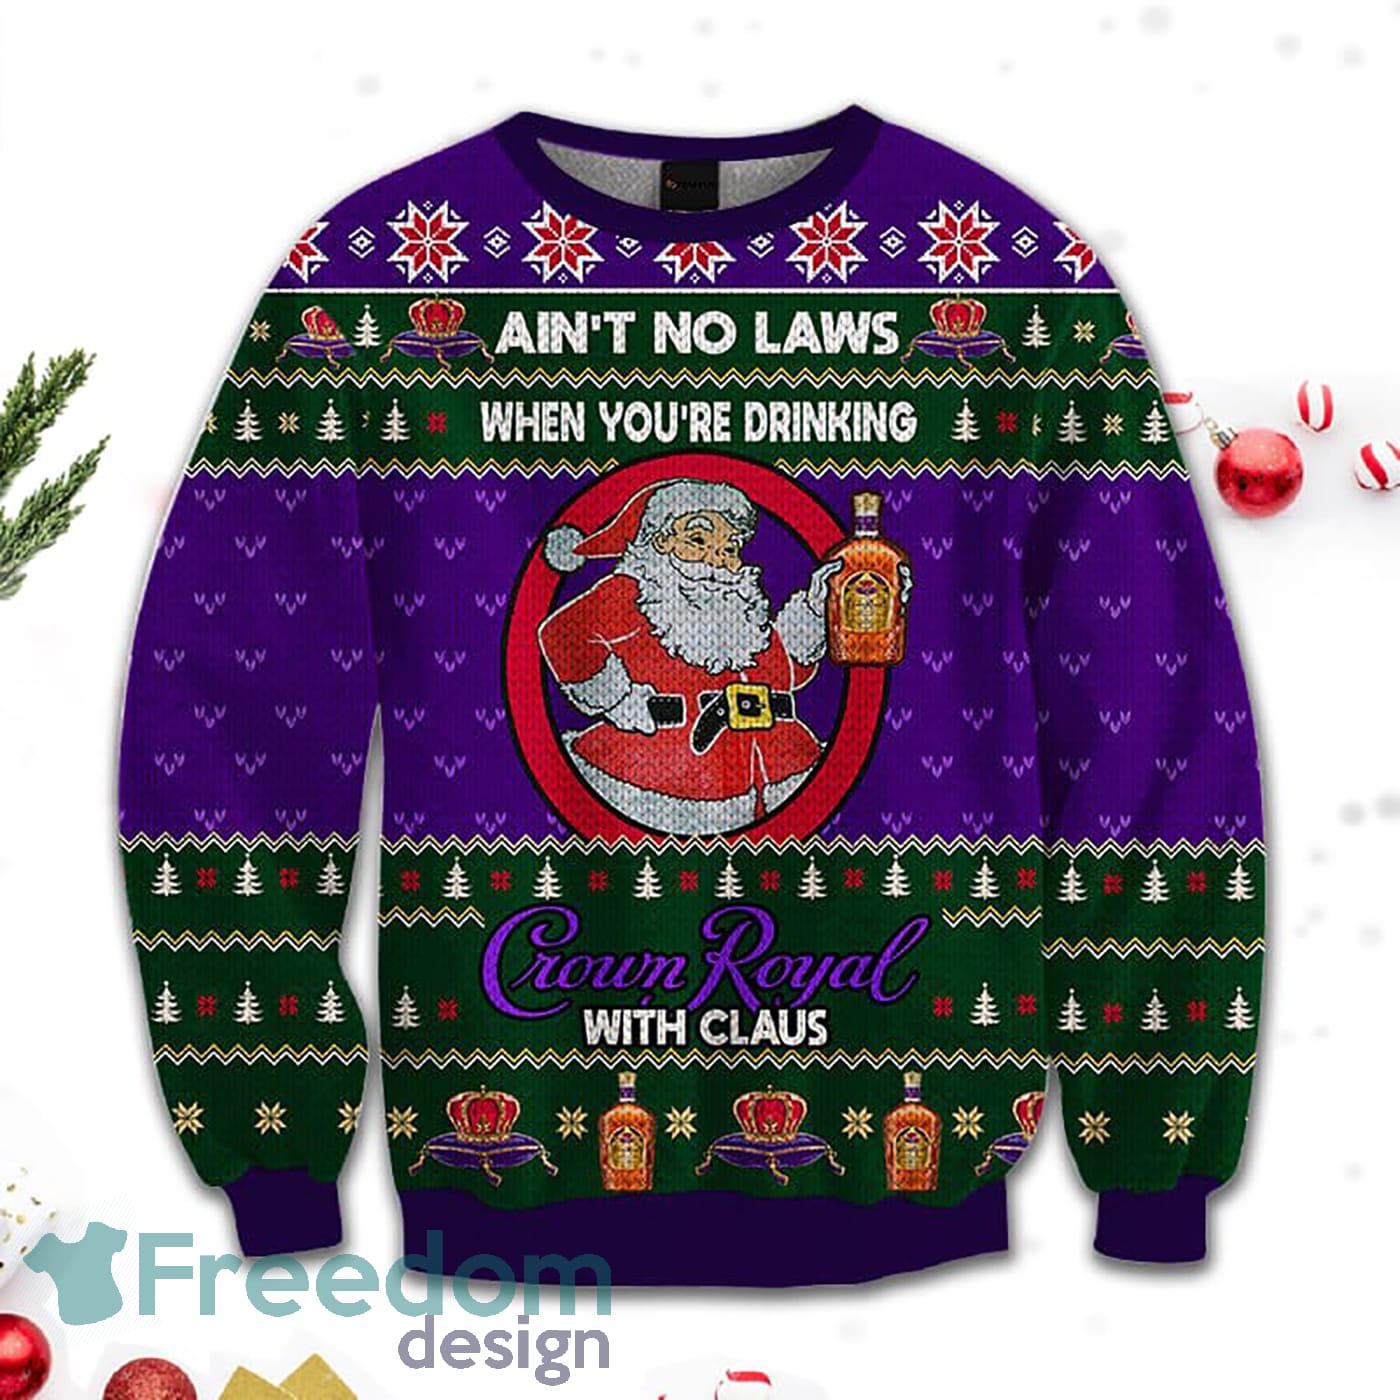 Ain't No Laws When You Drink Crown Royal With Claus Christmas Sweatshirt